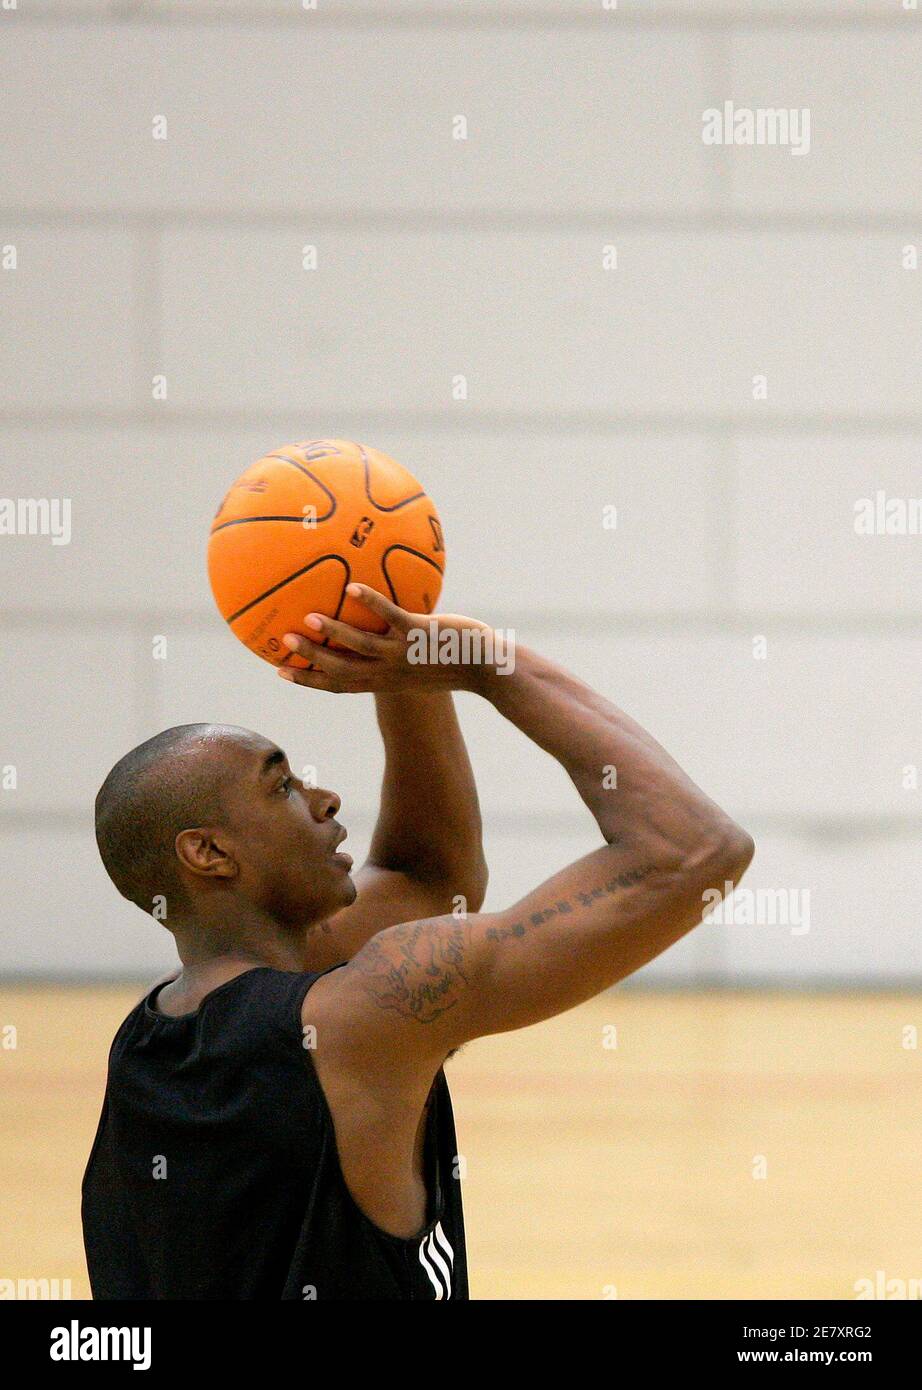 Philadelphia 76ers's basketball player Louis Williams practices during a  training session at Sant Jordi Stadium in Barcelona, during their 'NBA  Europe Live' tour, October 2, 2006. REUTERS/Albert Gea (SPAIN Stock Photo -  Alamy